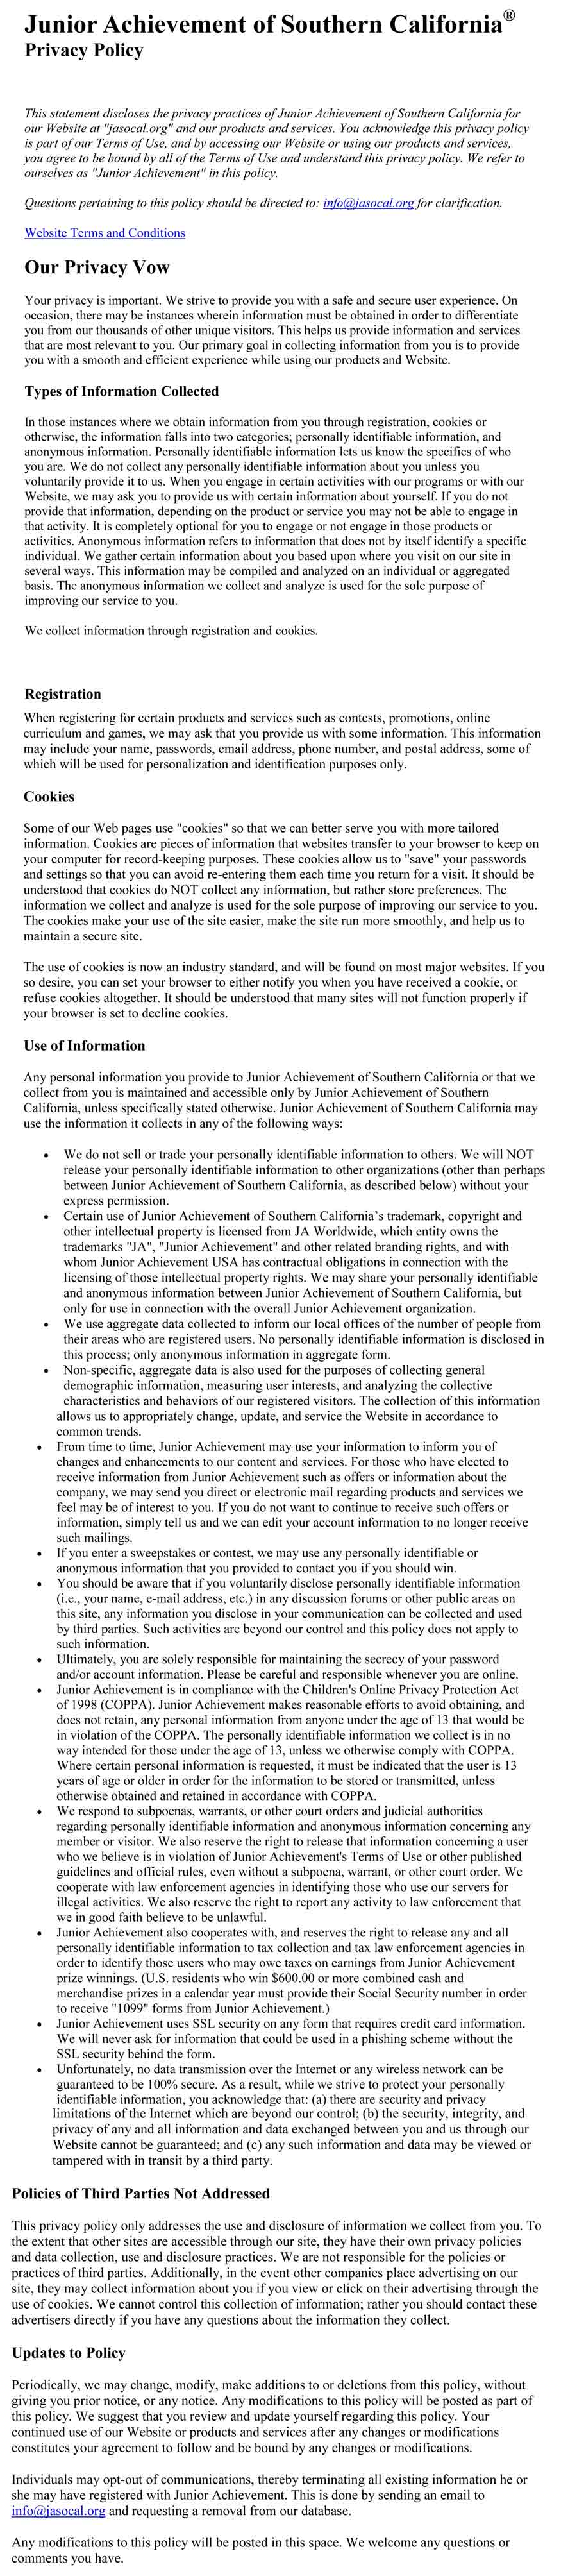 privacy_policy | Junior Achievement of Southern California